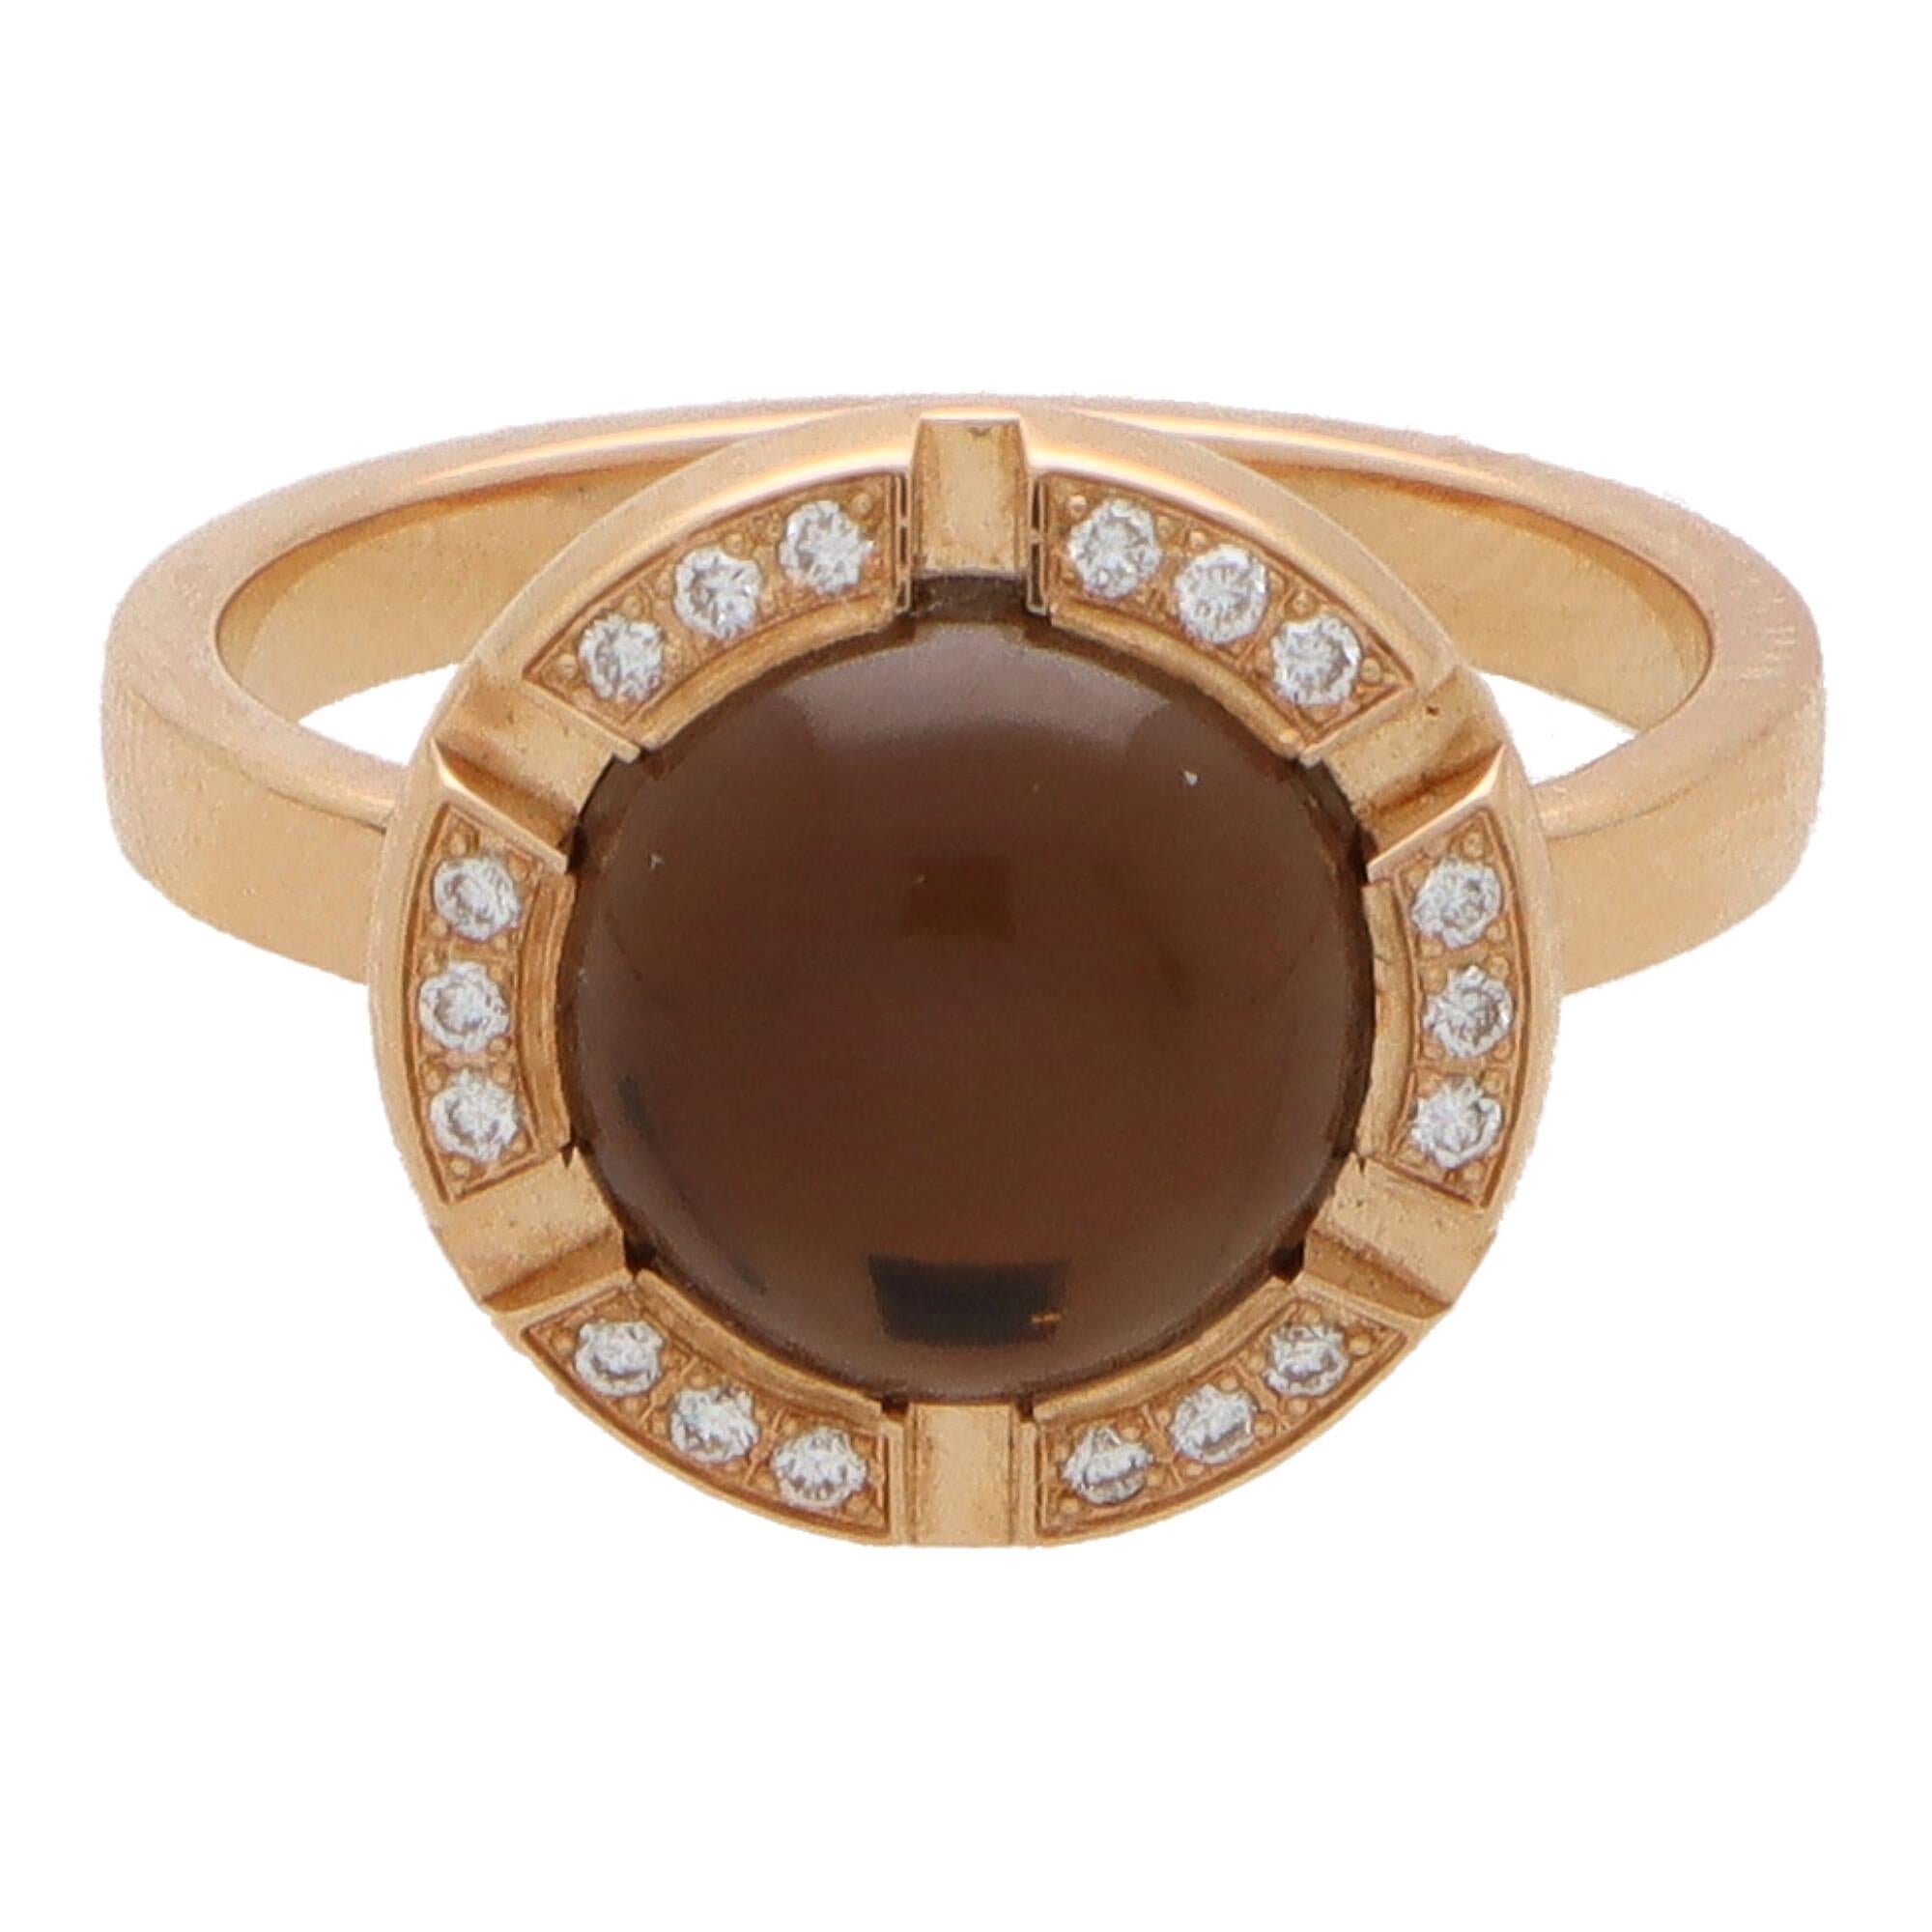 Vintage Chaumet Paris Smoky Quartz and Diamond Class One Ring in Rose Gold